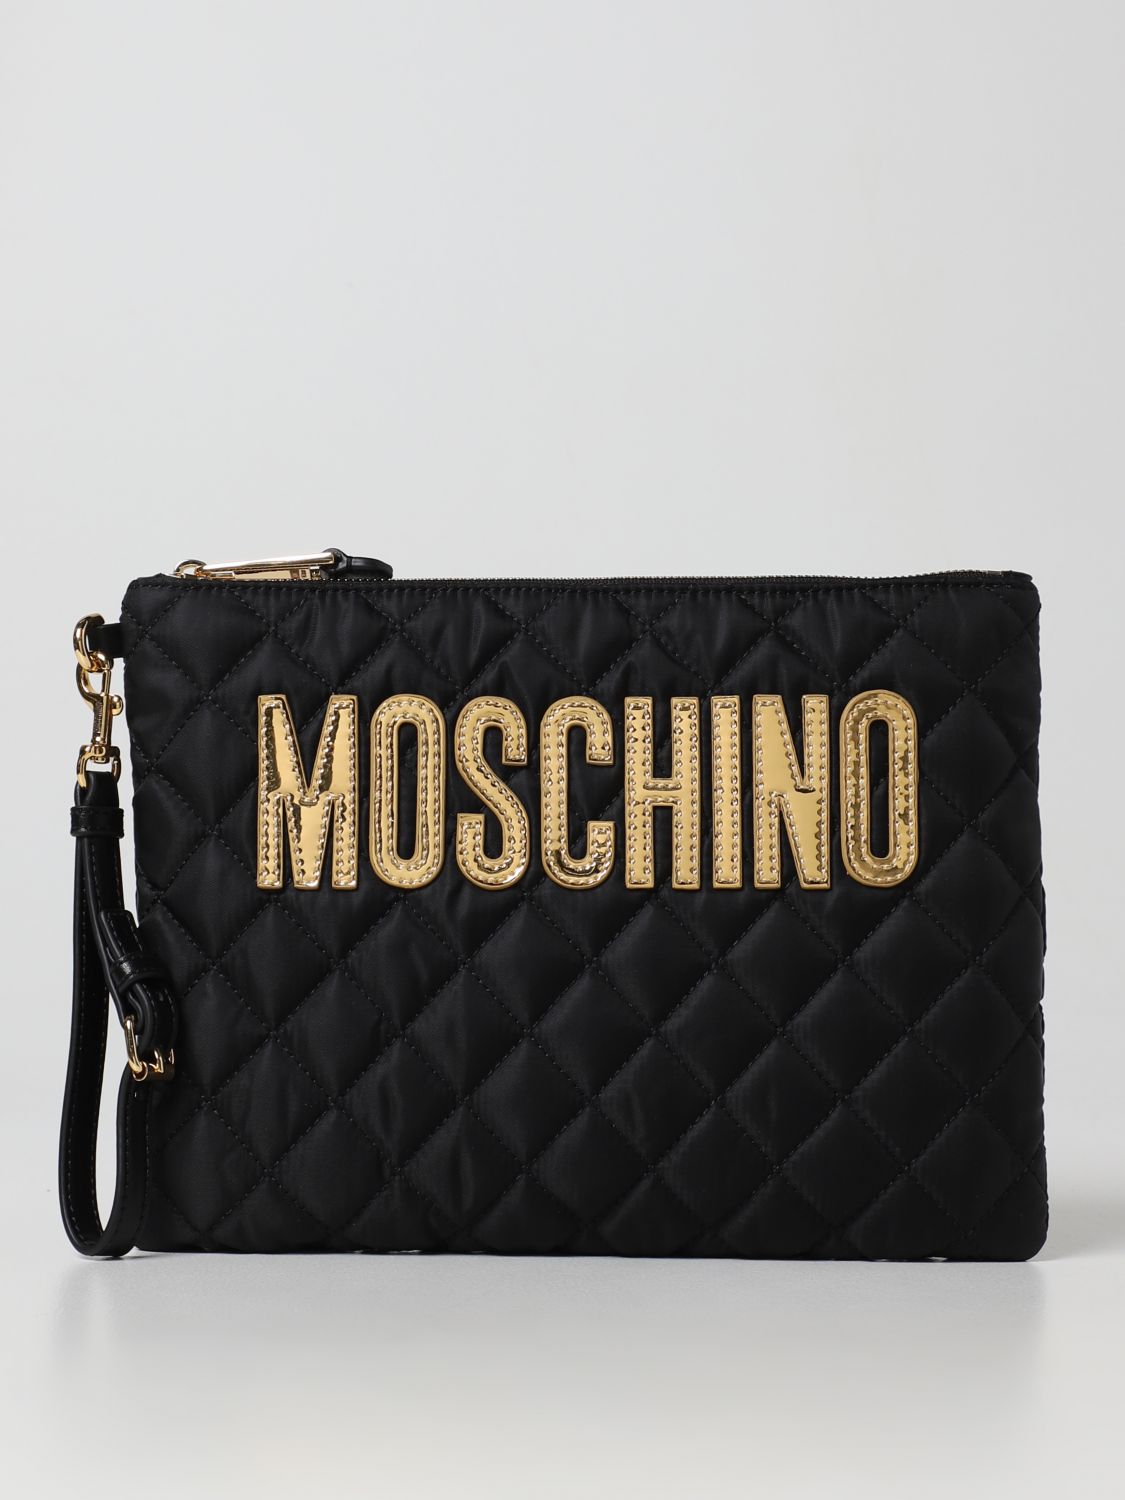 MOSCHINO COUTURE: quilted nylon clutch - Black | Moschino Couture ...